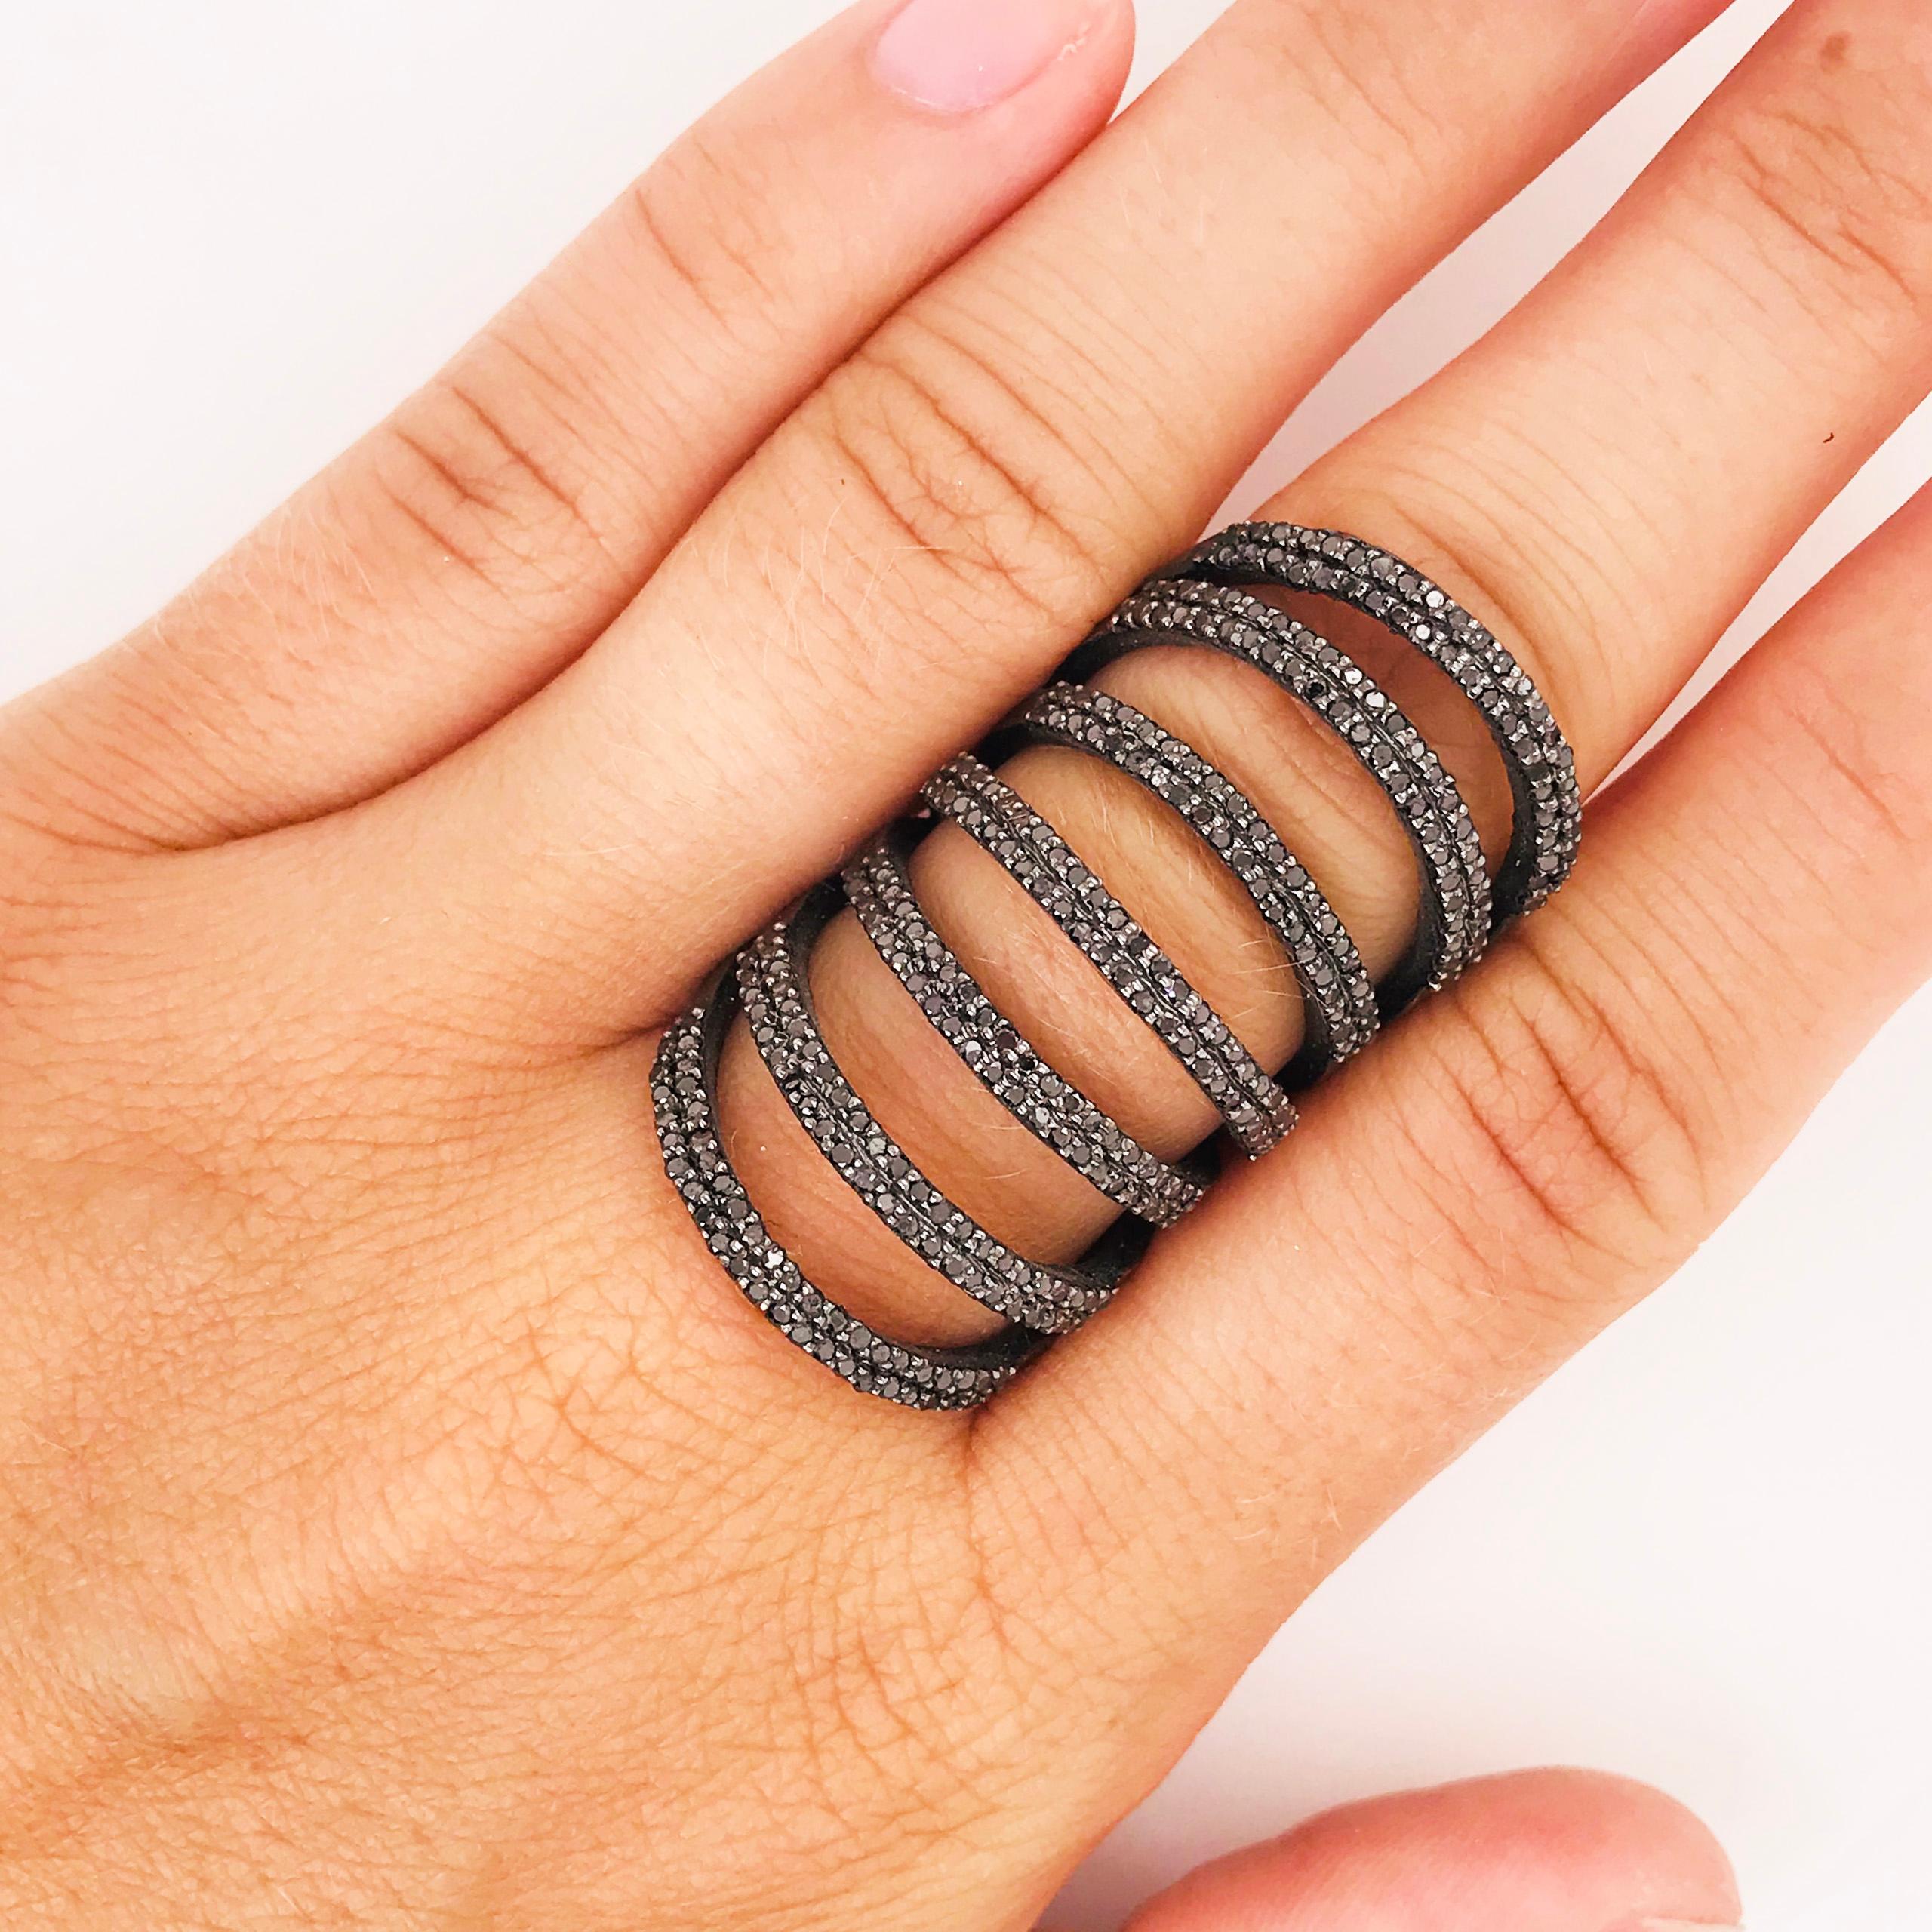 The long knuckle statement ring with 2 carats of black diamonds is an amazing way to wear black!  It goes with every black item that you have in your wardrobe and is neutral enough that you could wear it with anything!  The metal is black rhodium